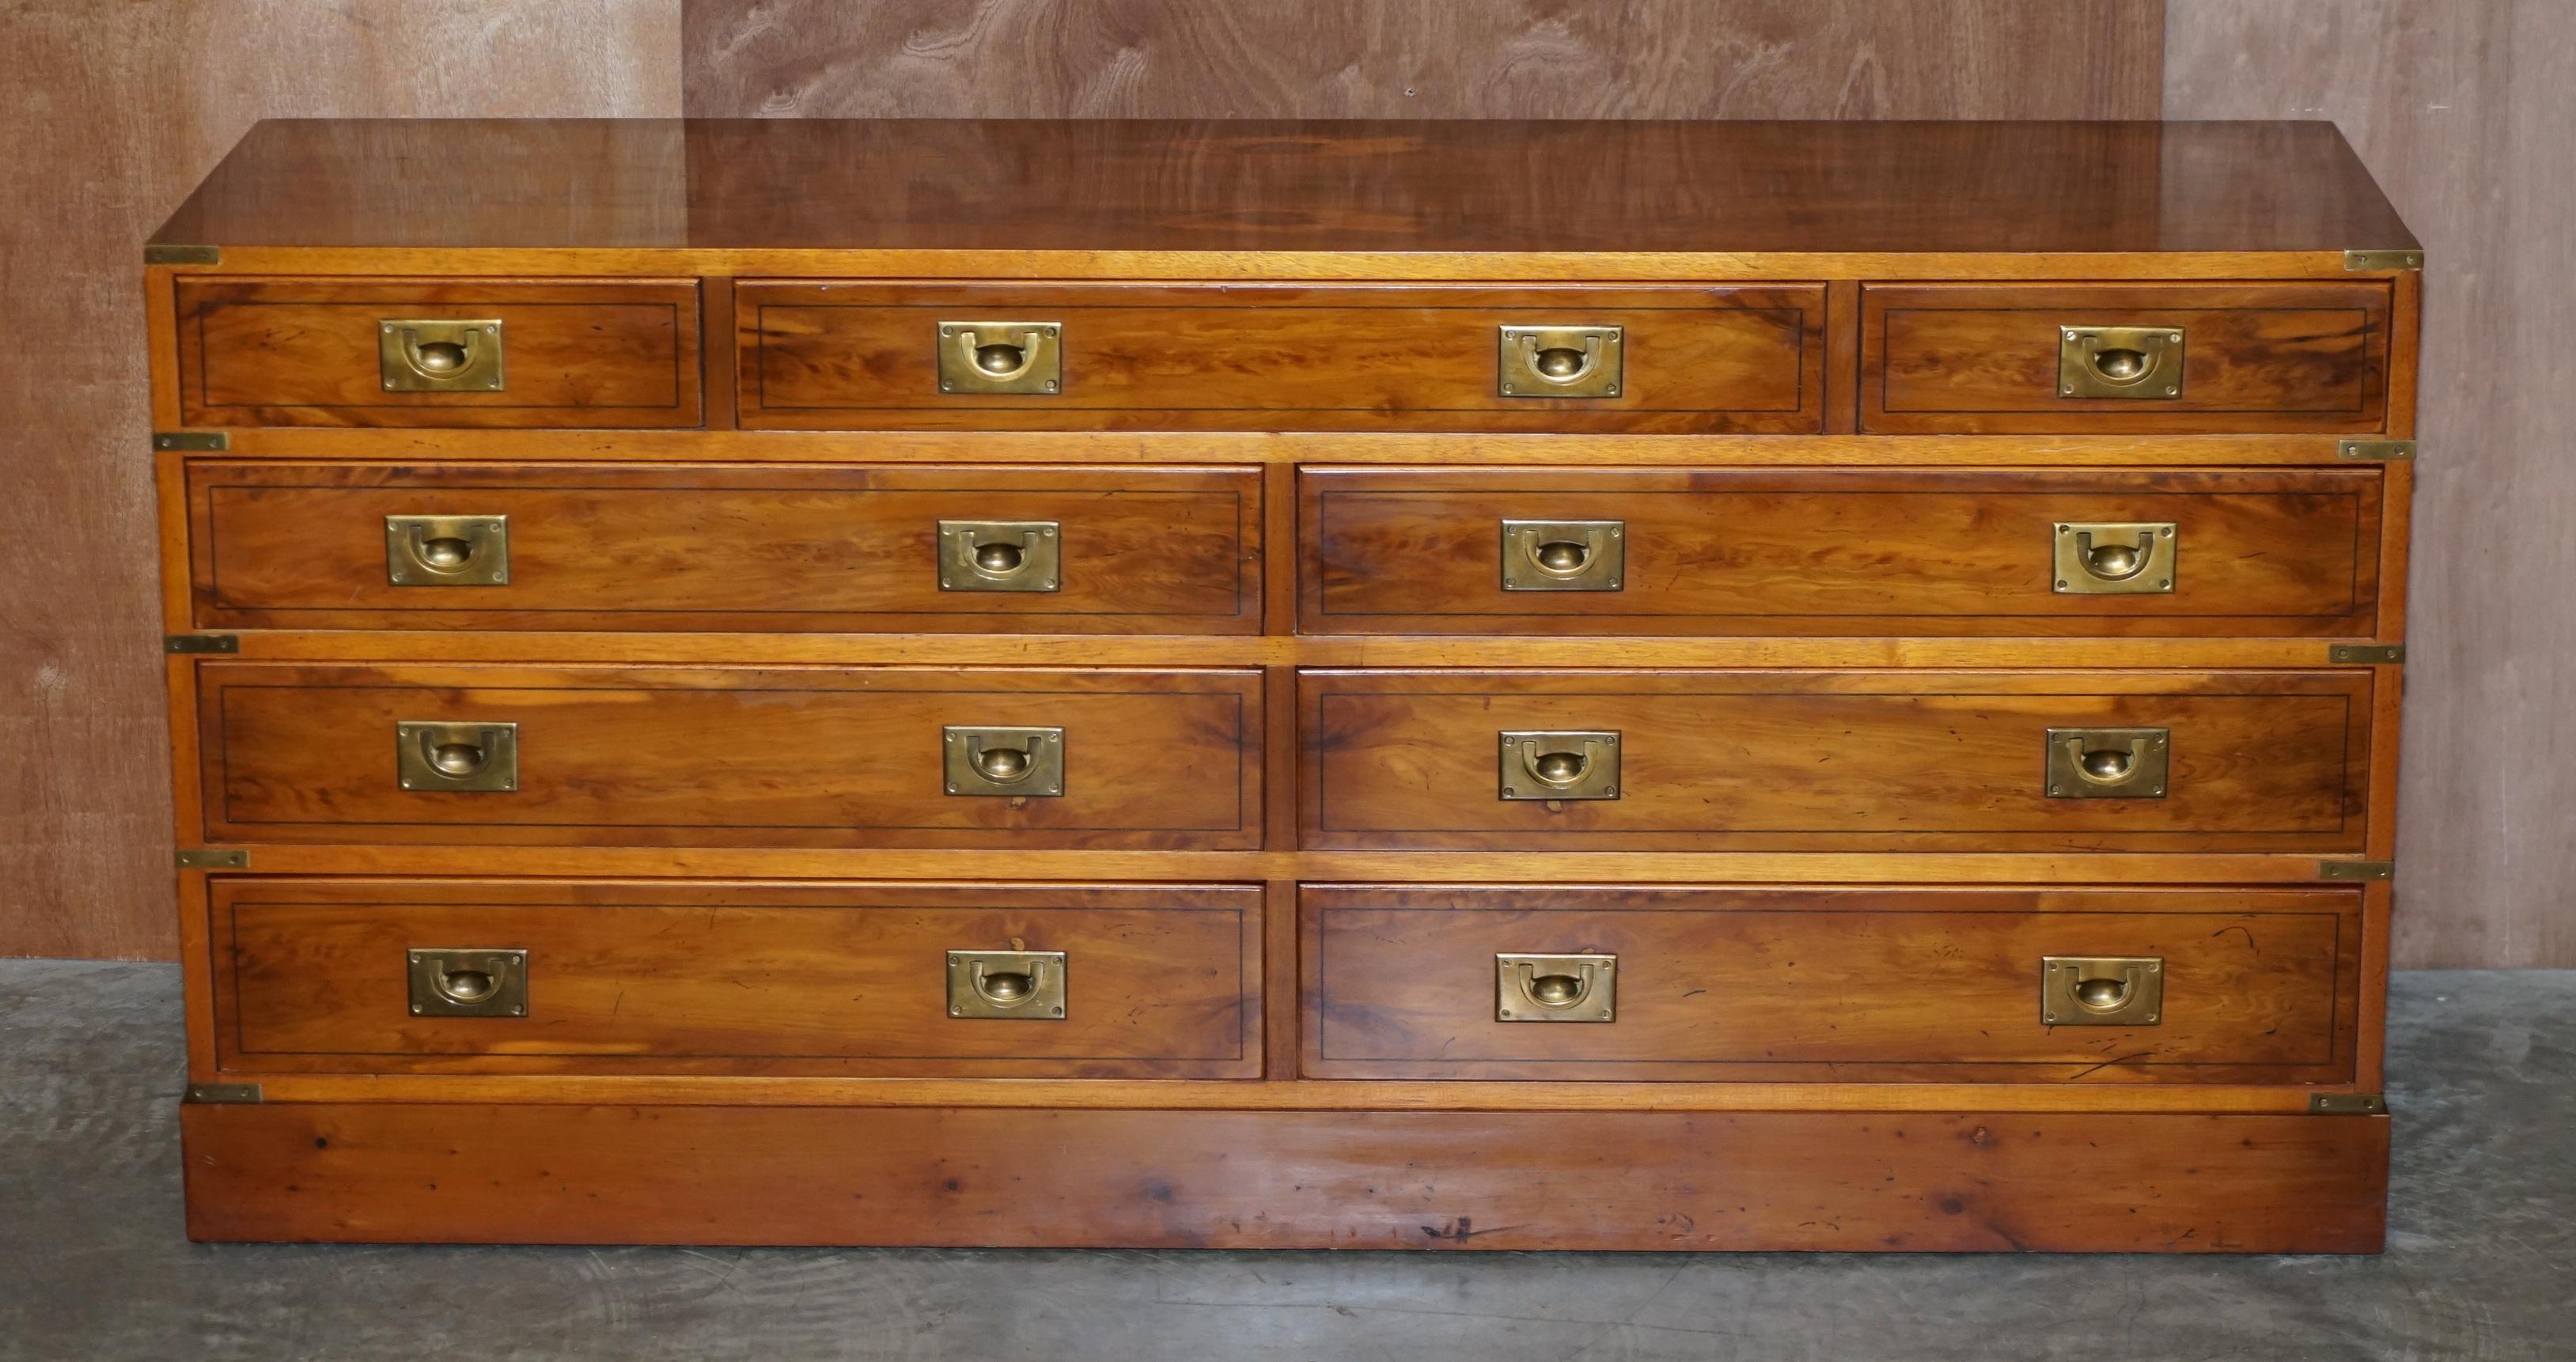 We are delighted to offer for sale this very fine burr yew wood military campaign bank of drawers sideboard

A very good looking and well made piece, these don’t come up for sale very often, they are usually in more basic timbers with a lot less